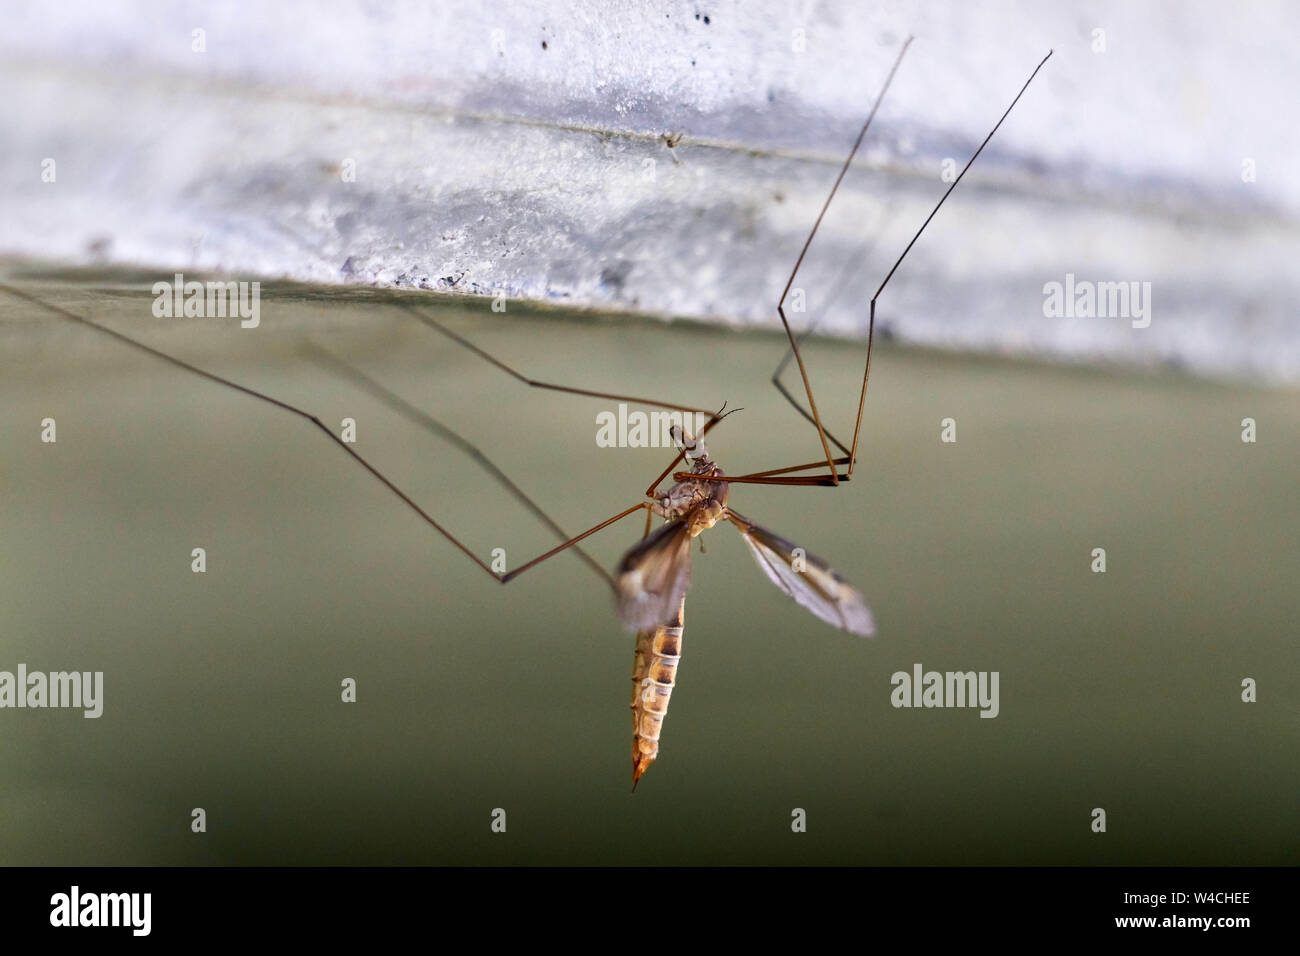 A crane fly (family Tipulidae, sometimes called a mosquito hawk) rests upside down on concrete in a macro photo. Stock Photo